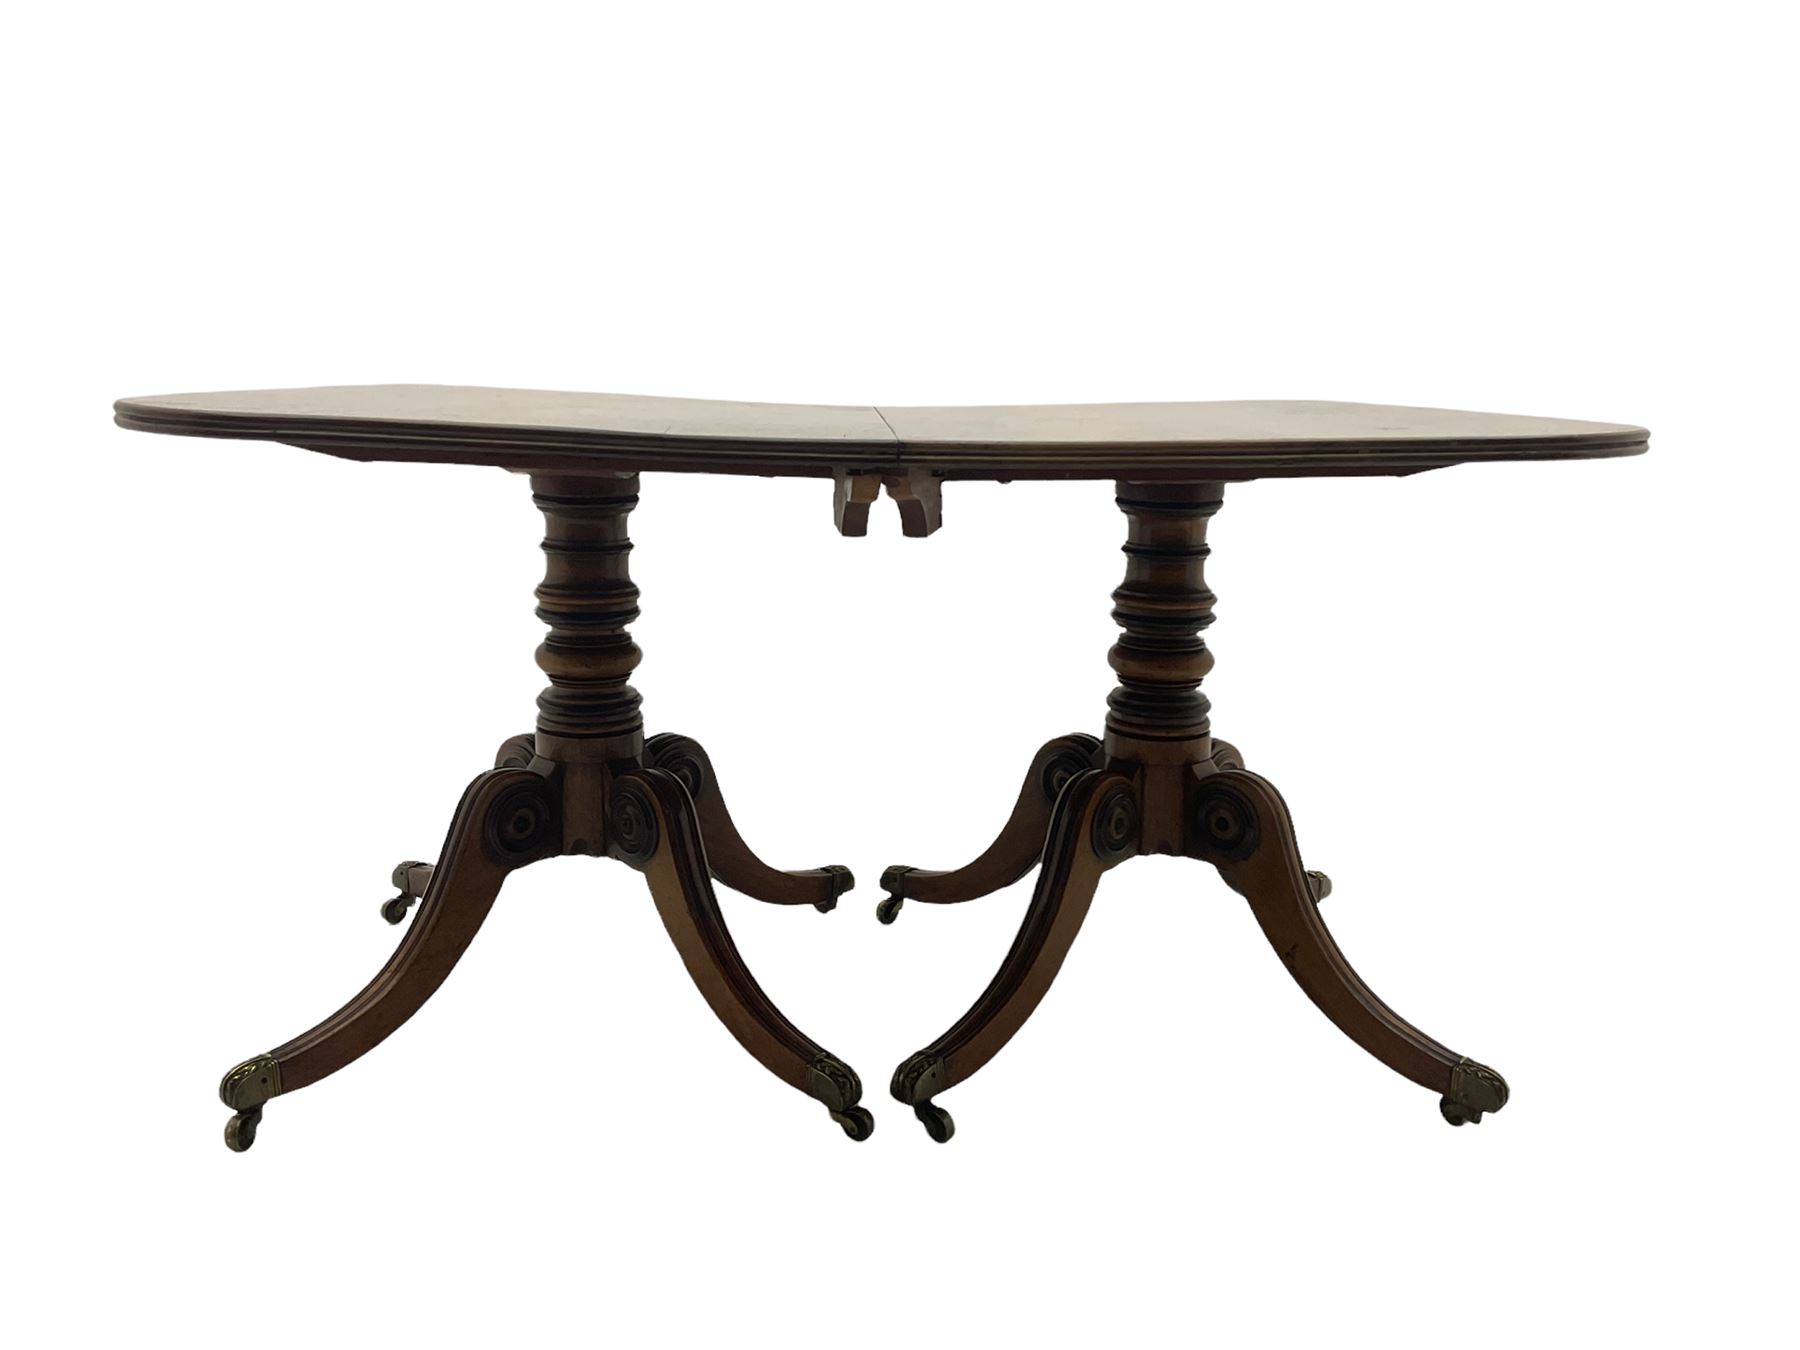 Early 19th century mahogany extending dining table - Image 7 of 9